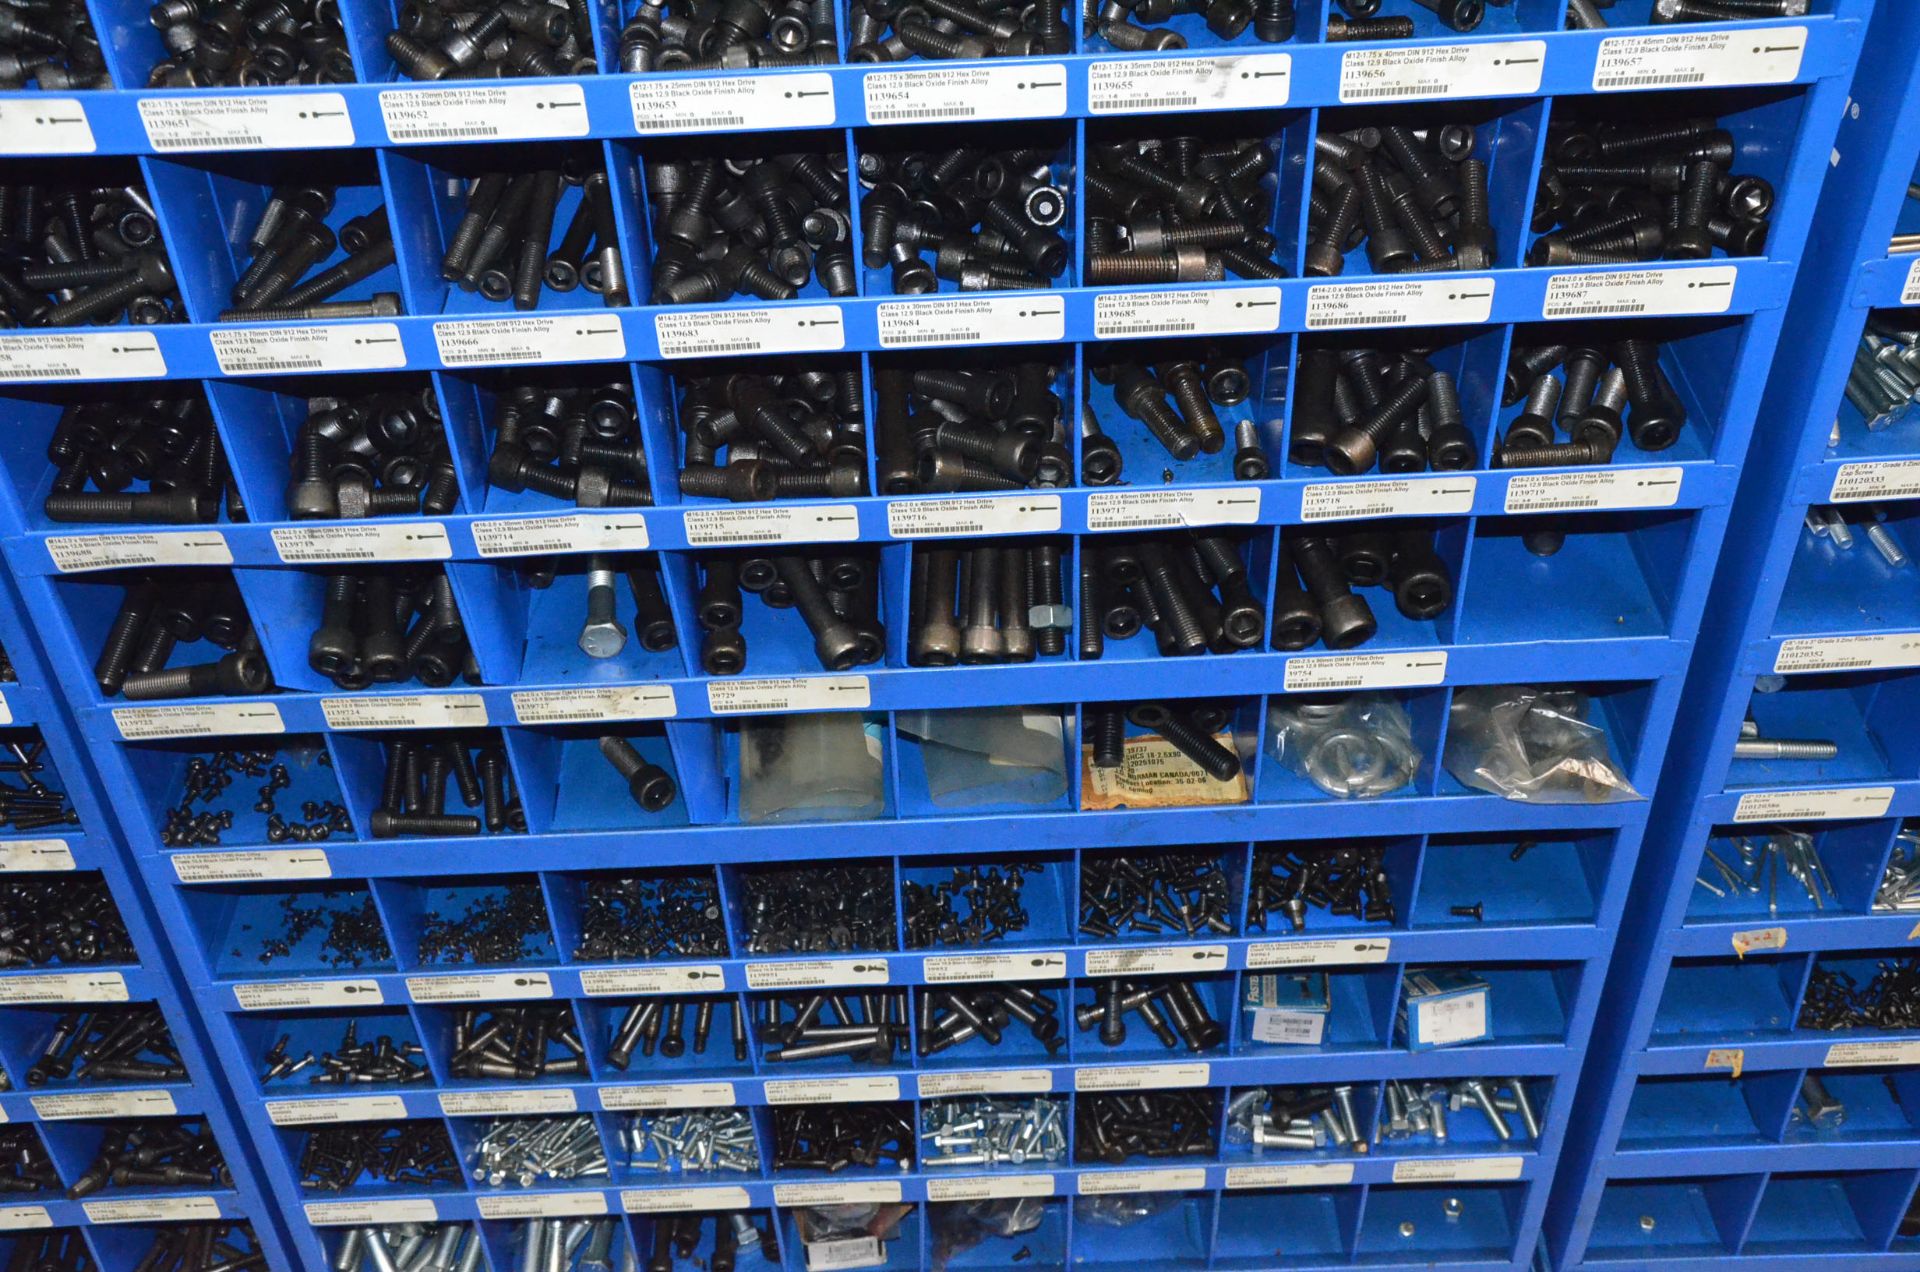 LOT/ FASTENAL PIGEON HOLE INDEX CABINETS WITH FASTENING HARDWARE - Image 9 of 11